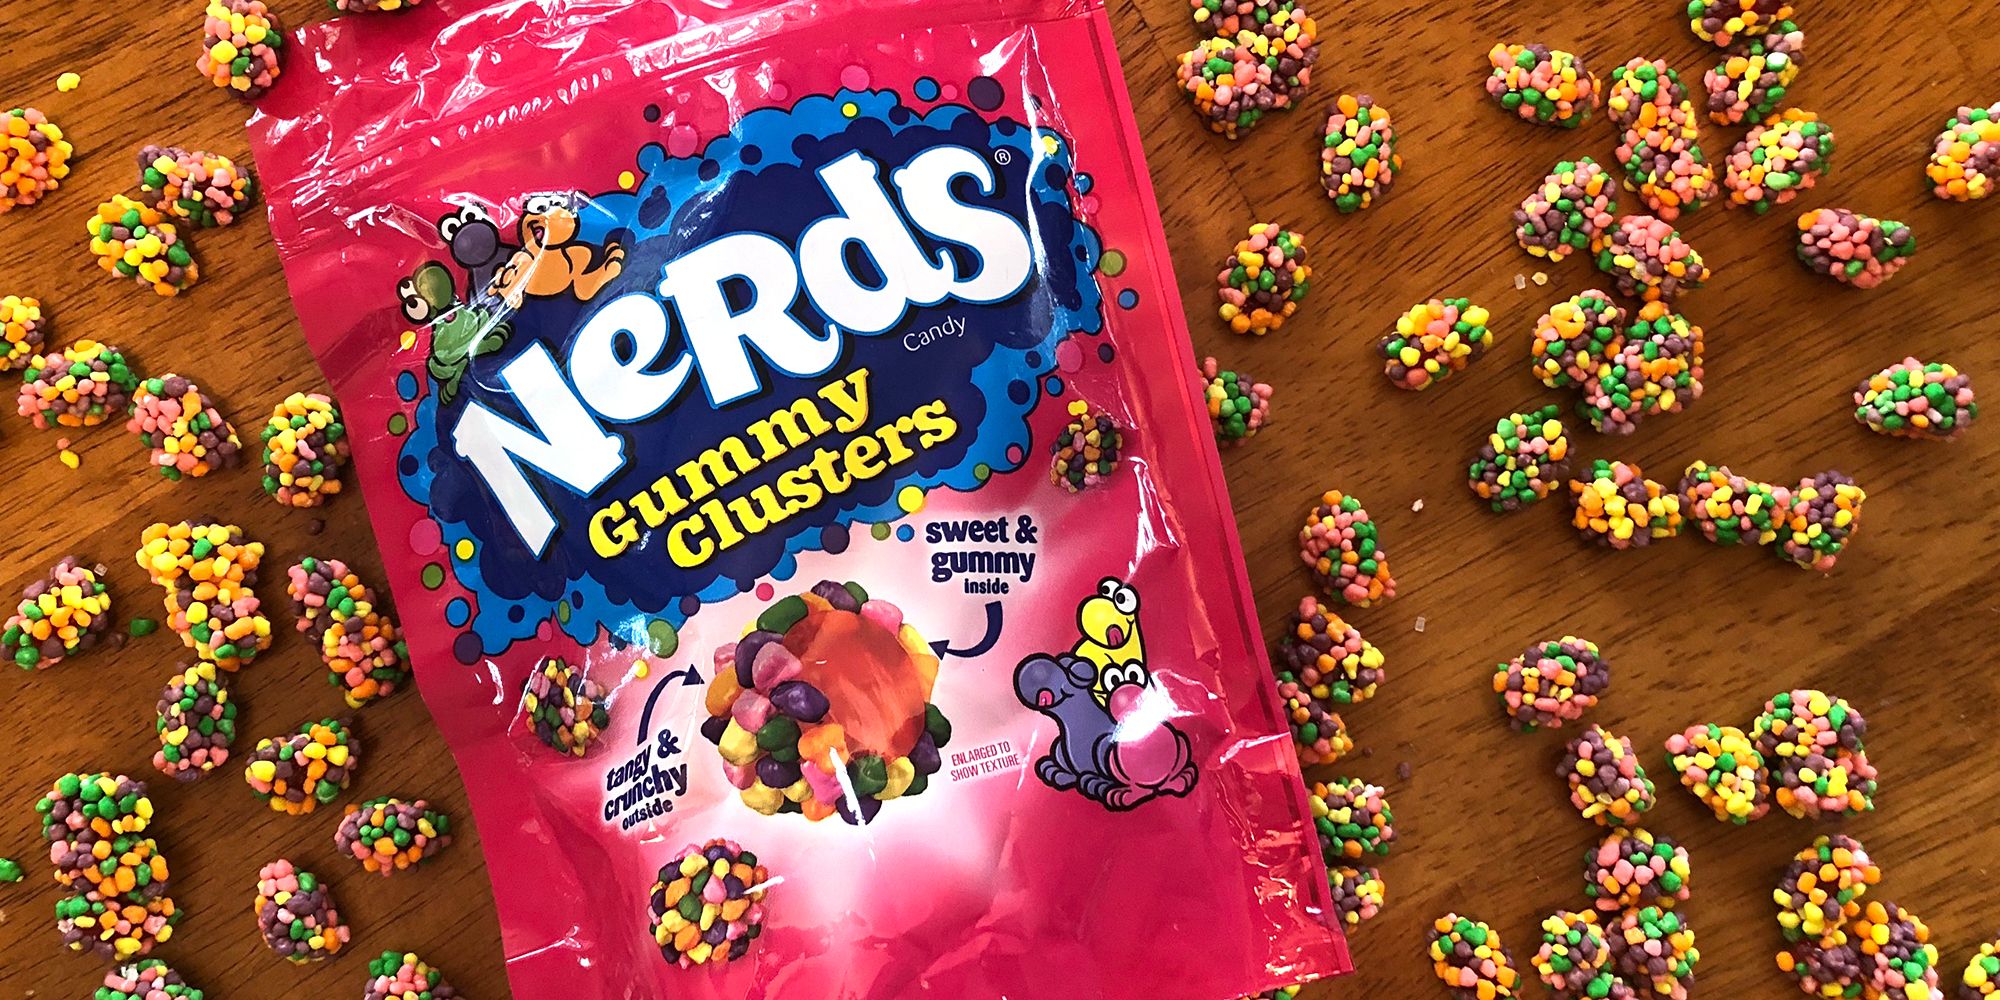 The New Nerds Gummy Clusters Combine Crunchy and Gummy Bites, So Check ...